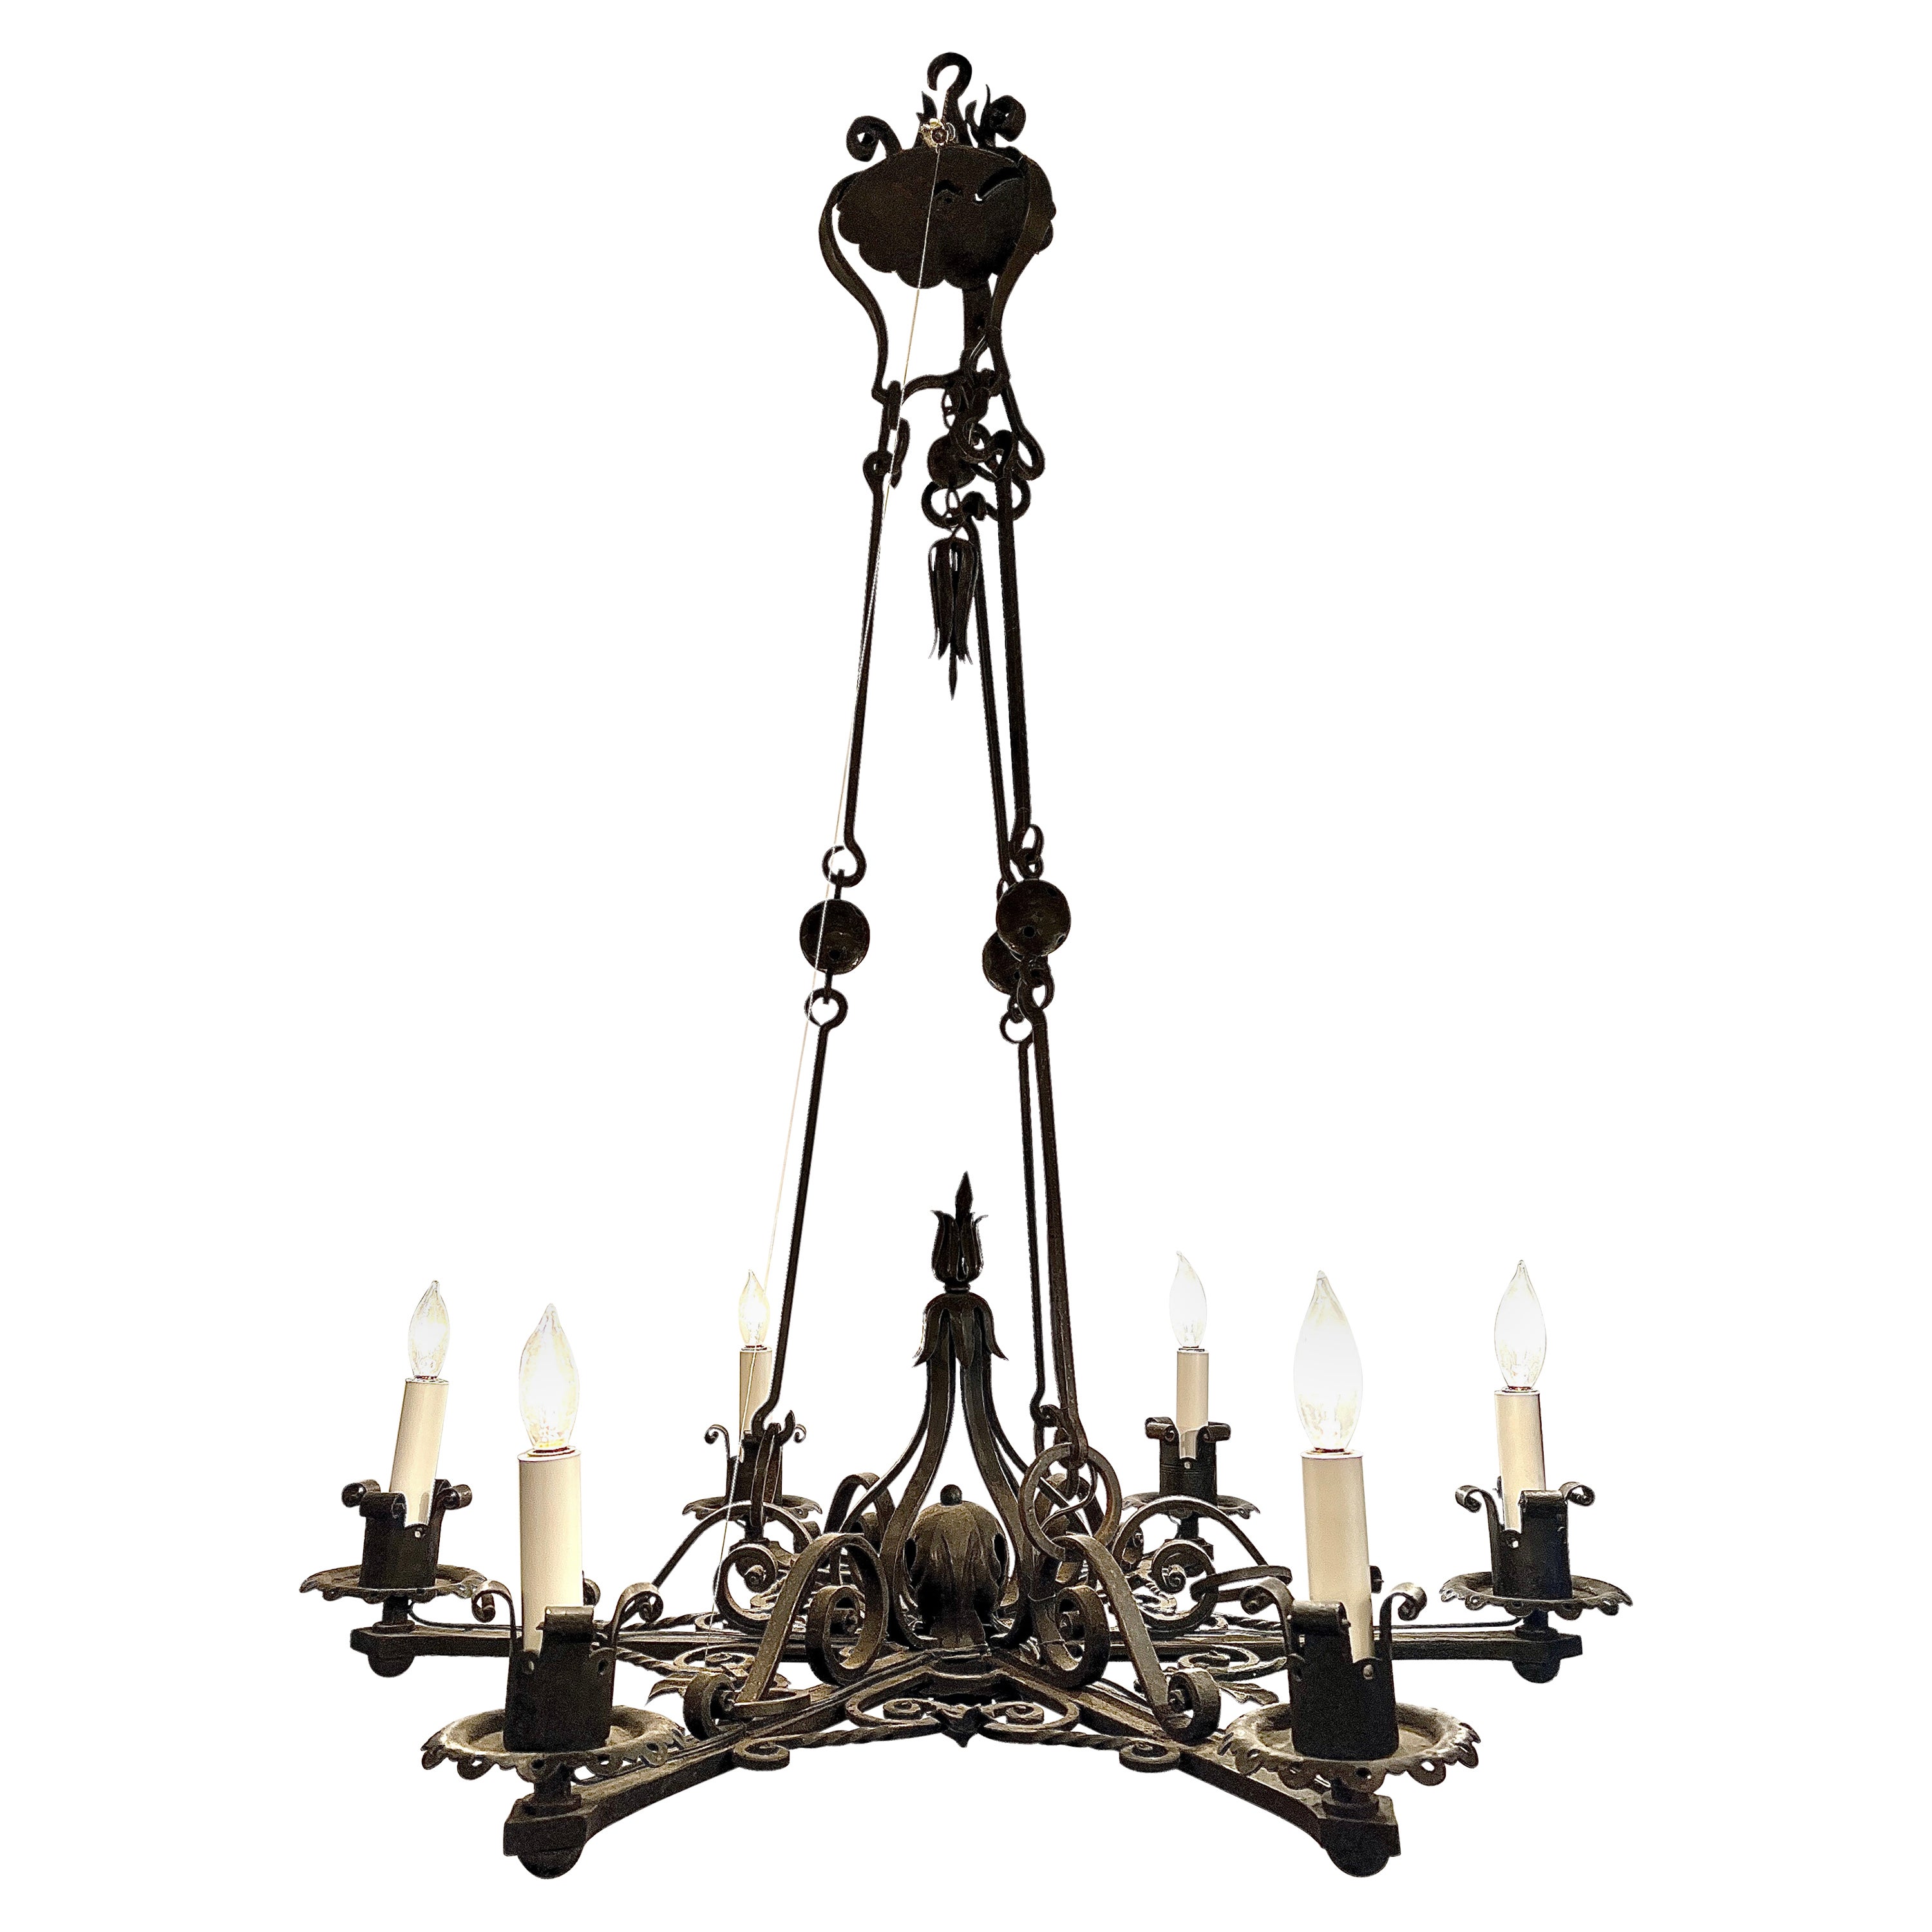 Antique French Wrought Iron Chandelier, Circa 1900-1910. For Sale